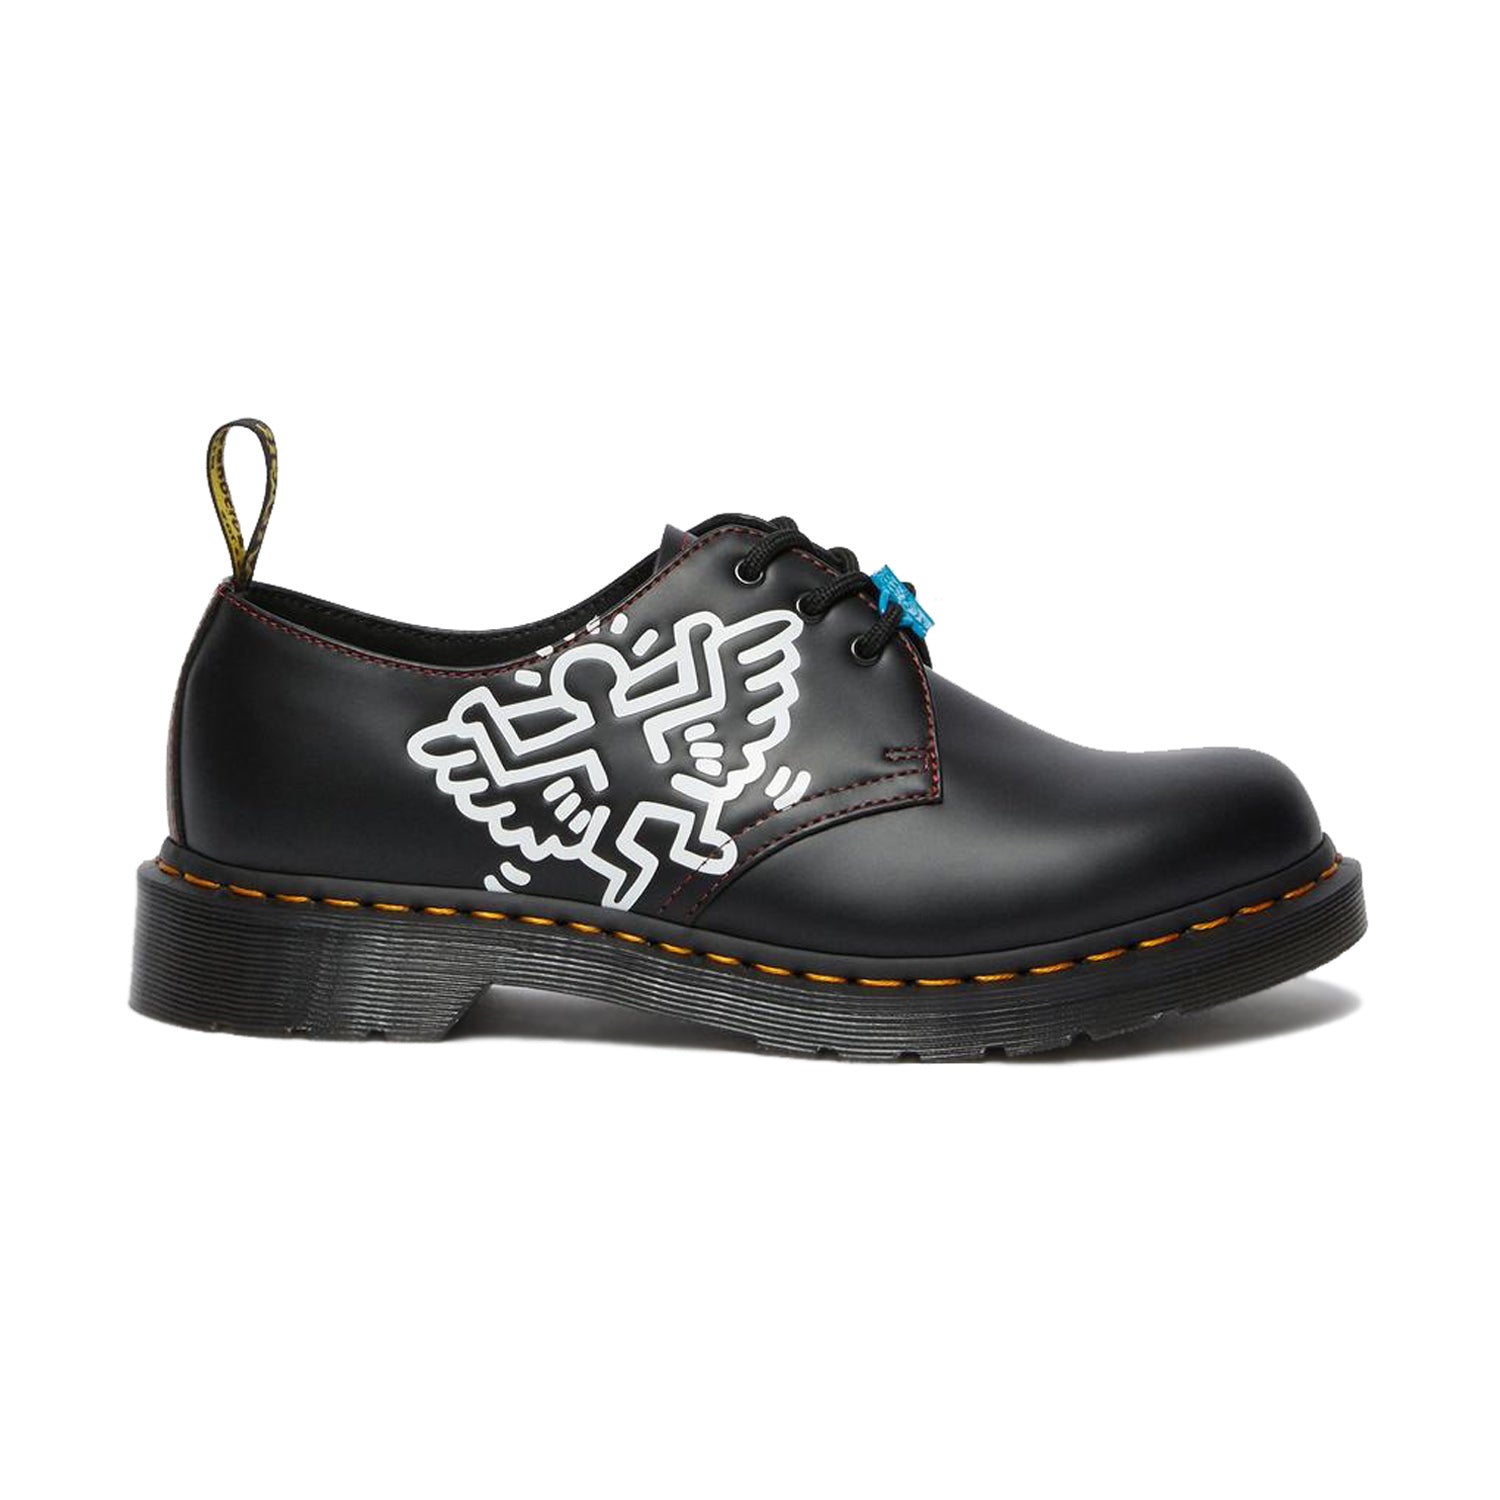 Dr. Martens 1461 Keith Haring Black Leather Shoes Black Smooth